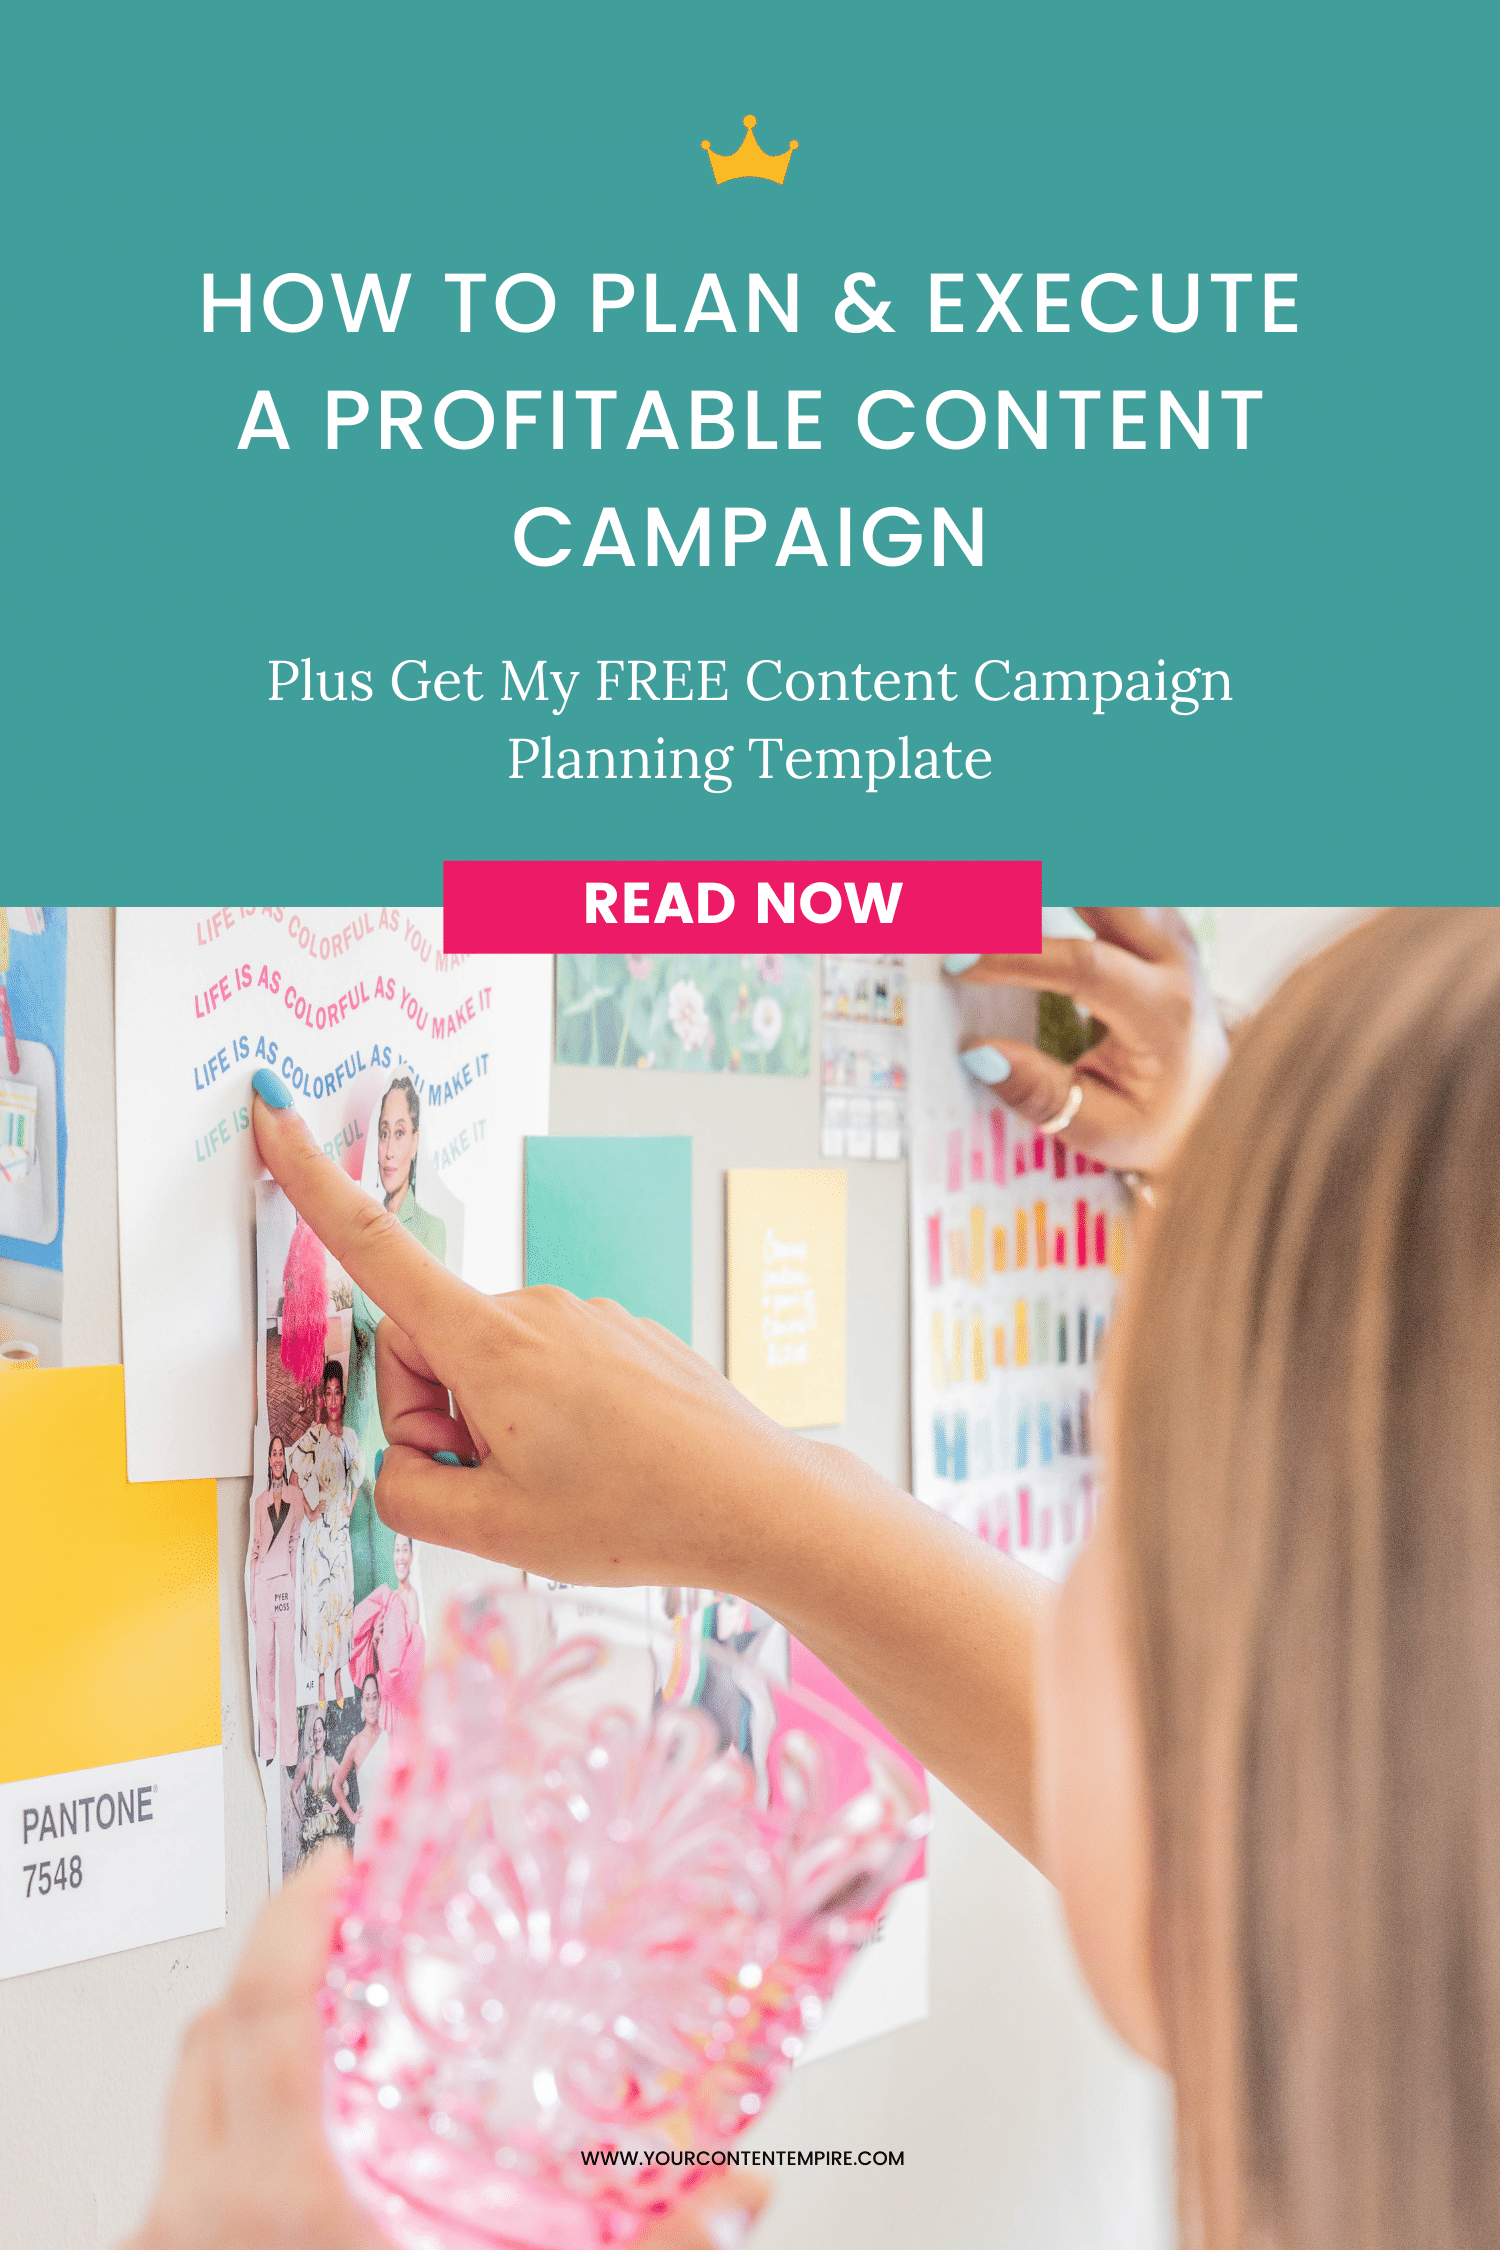 How to Plan & Execute a Profitable Content Campaign